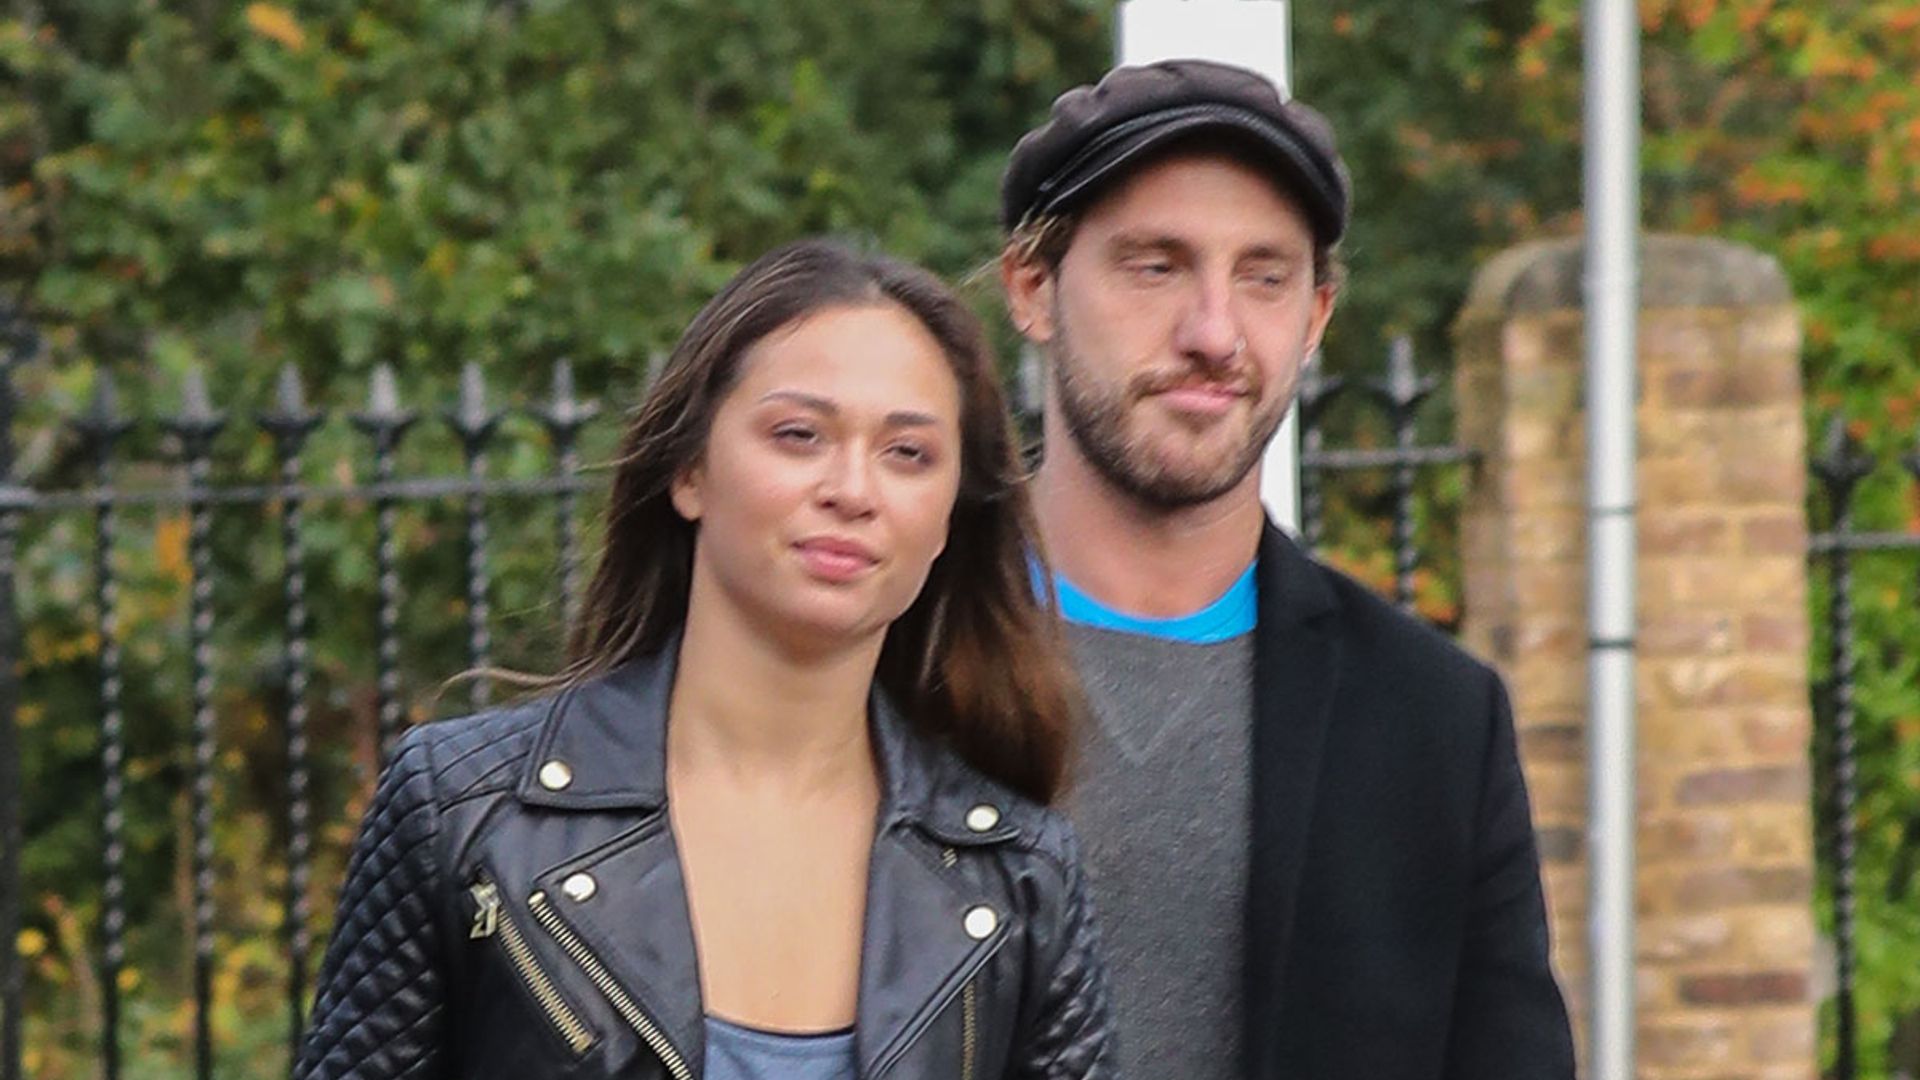 Strictly's Katya Jones tries to avoid Seann Walsh question after kiss scandal